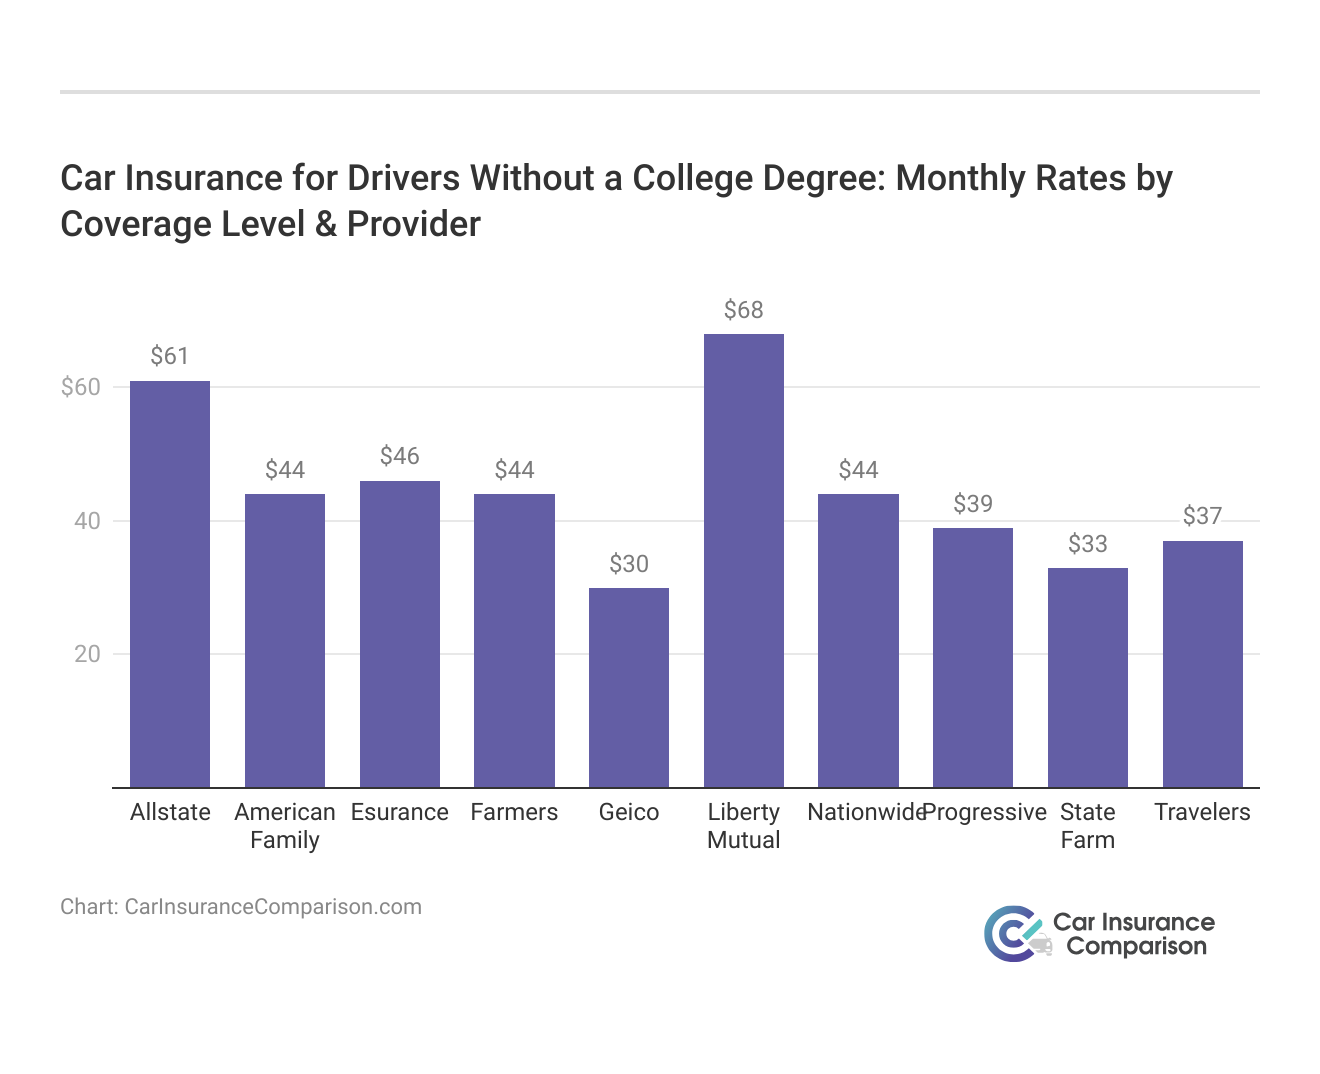 <h3>Car Insurance for Drivers Without a College Degree: Monthly Rates by Coverage Level & Provider</h3>